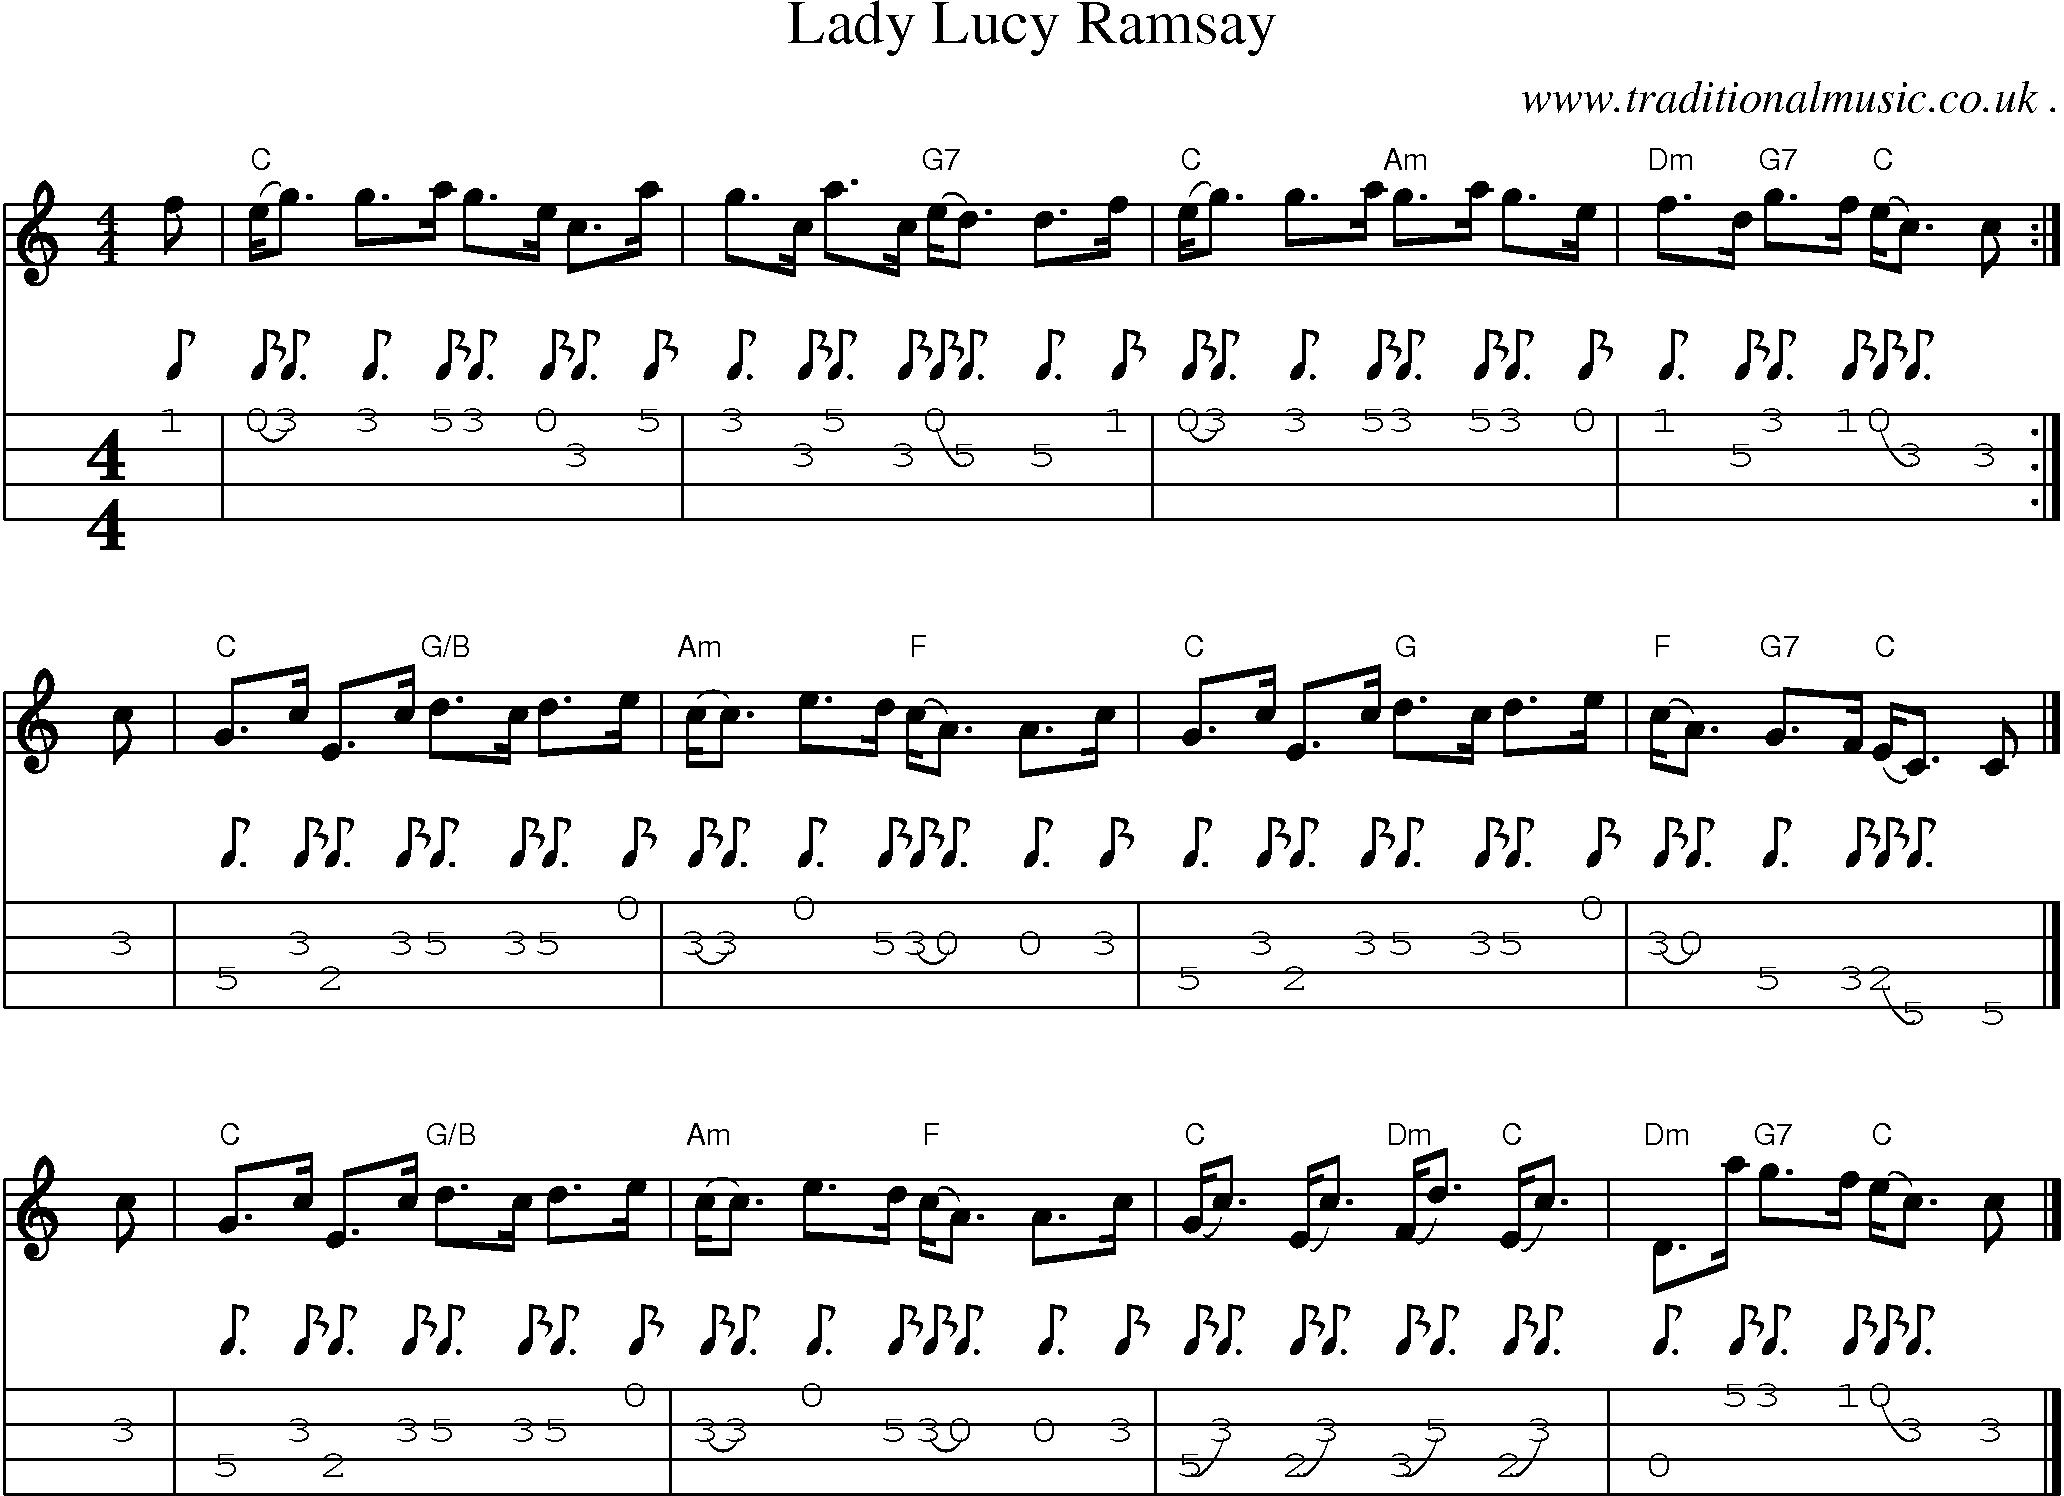 Sheet-music  score, Chords and Mandolin Tabs for Lady Lucy Ramsay